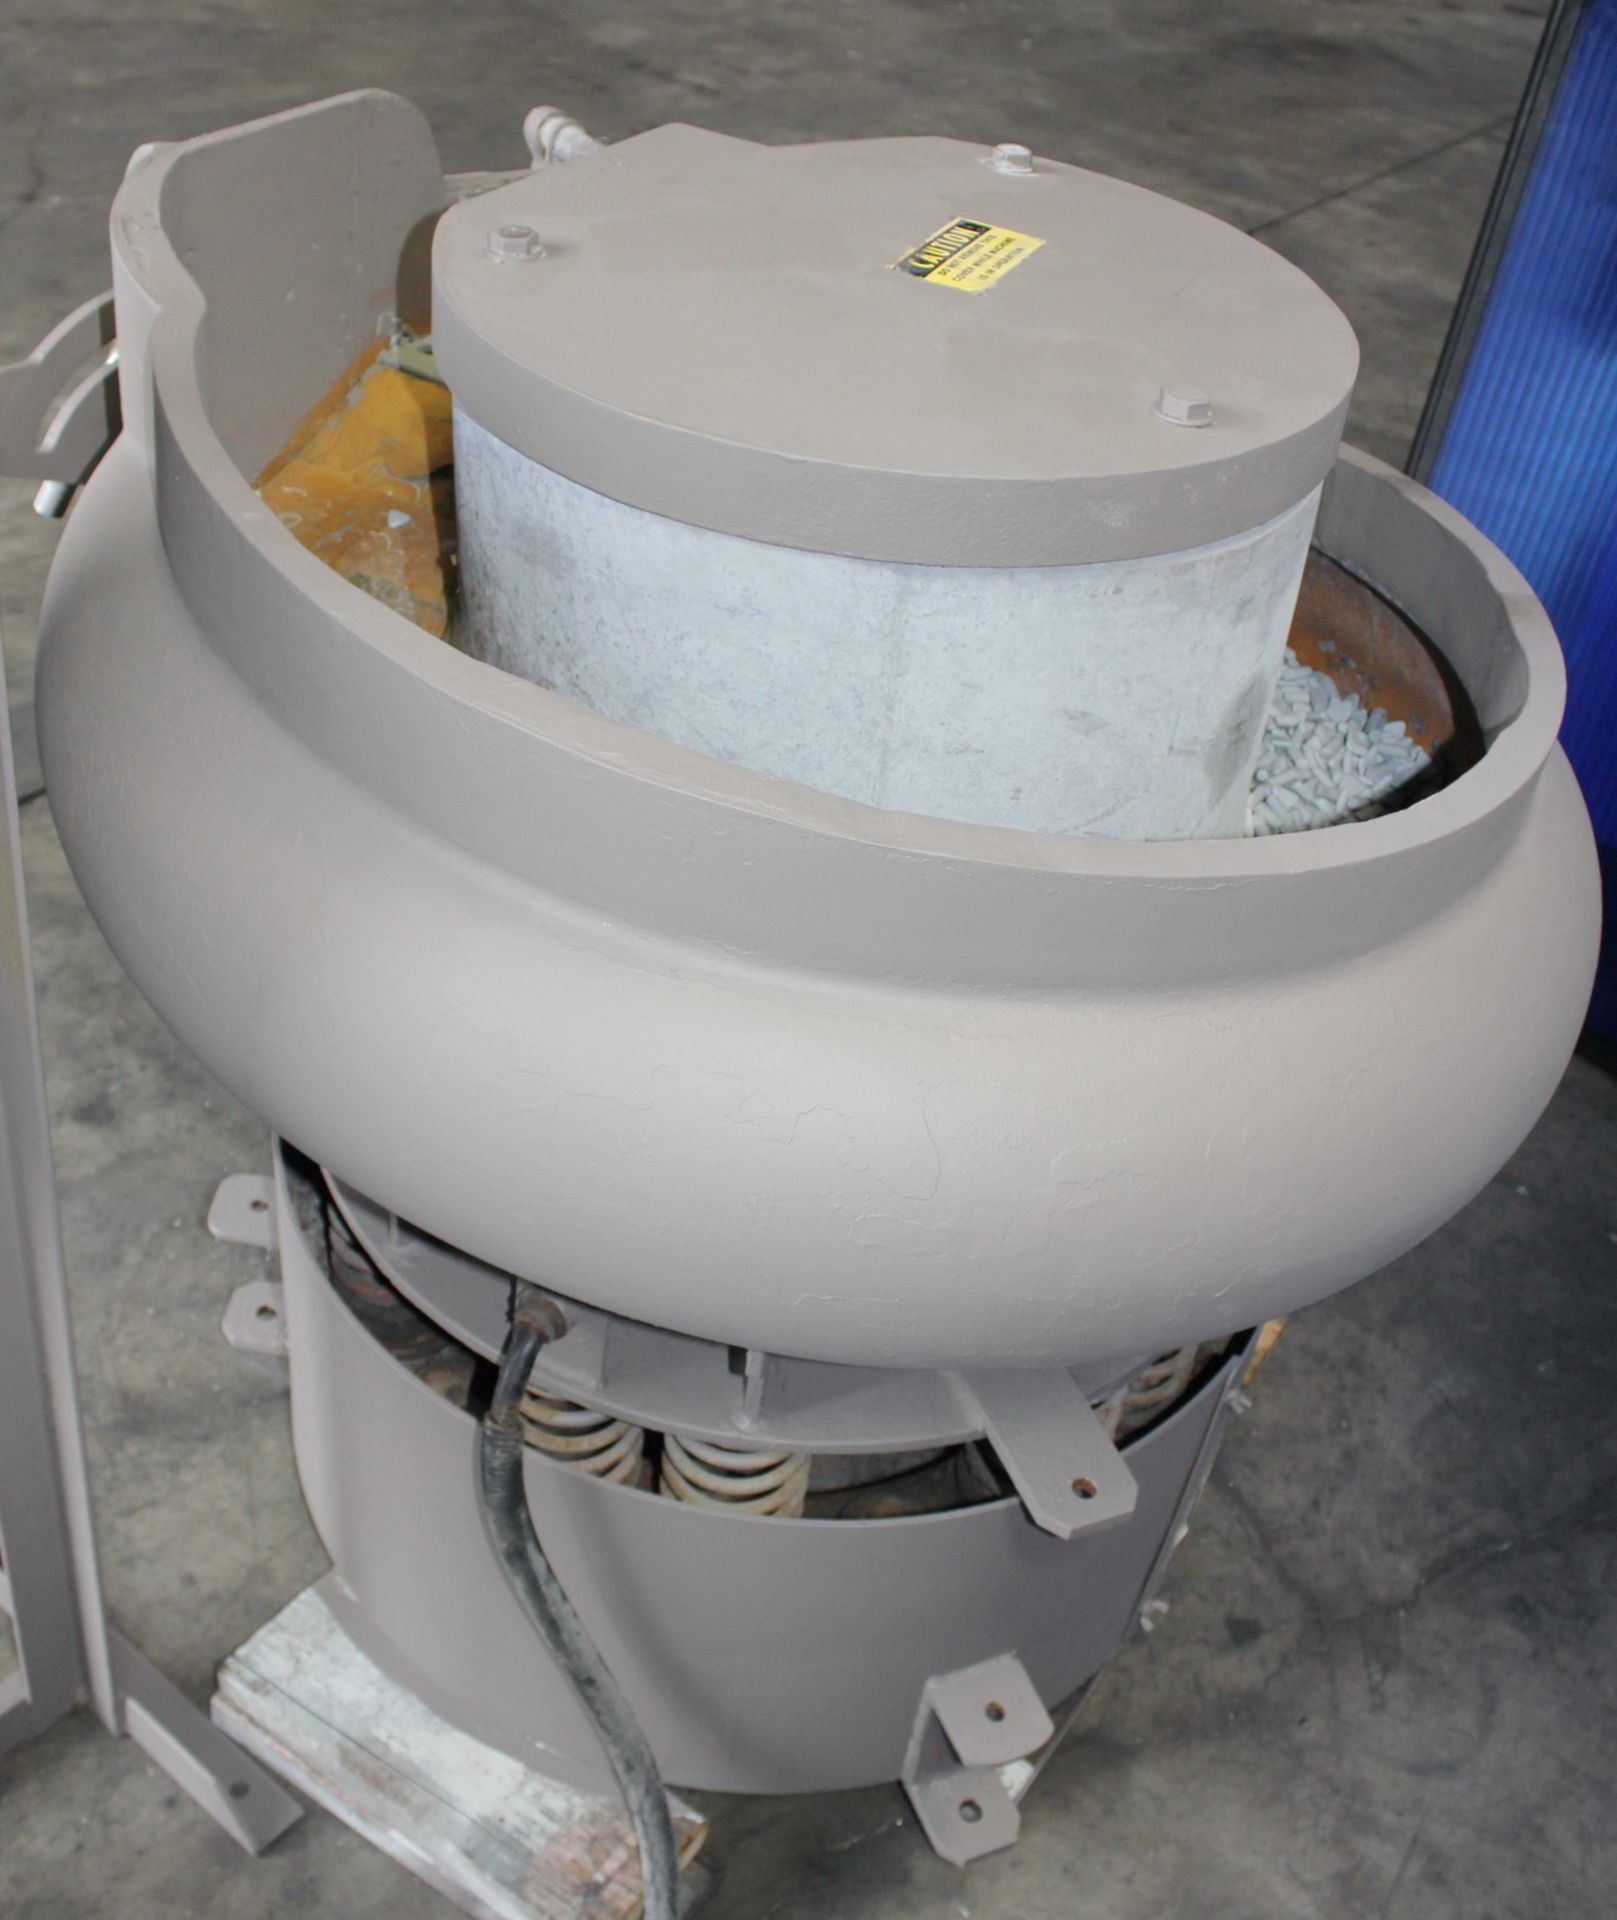 Gyromatic - Vibratory Deburring Machine (Bowl Type) | 4.5 Cubic Feet, Located In Huntington Park, CA - Image 4 of 13